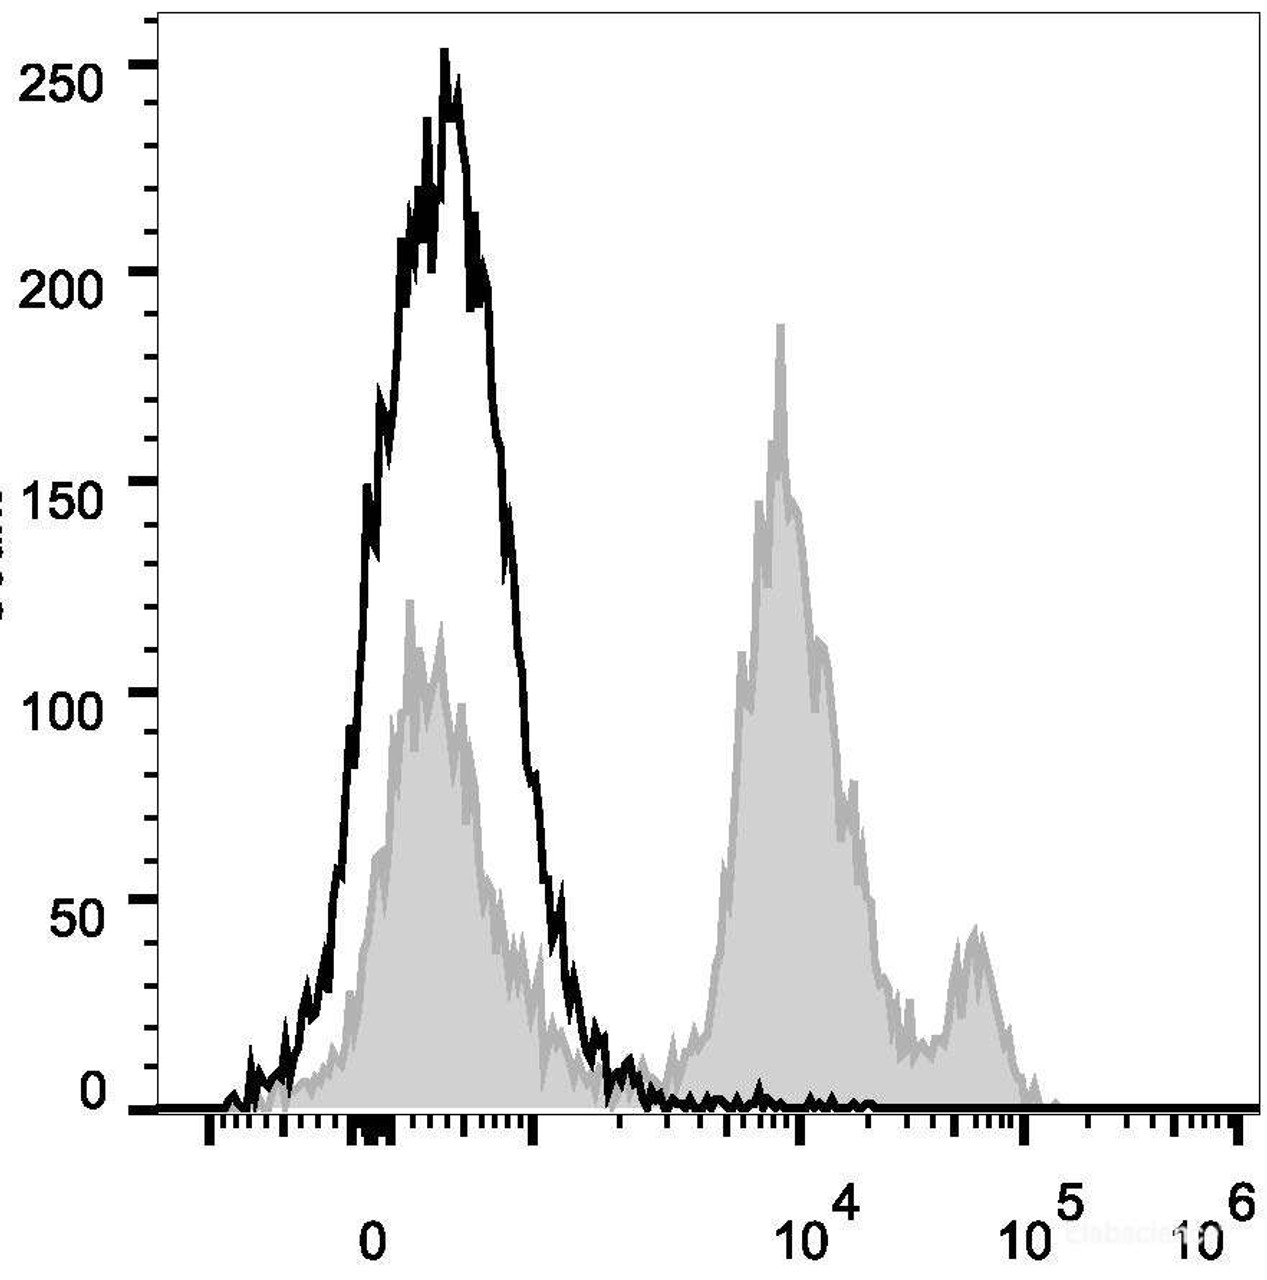 C57BL/6 murine bone marrow cells are stained with PercP Anti-Mouse Ly6C Antibody[Used at .2 μg/1<sup>6</sup> cells dilution](filled gray histogram). Unstained bone marrow cells (empty black histogram) are used as control.